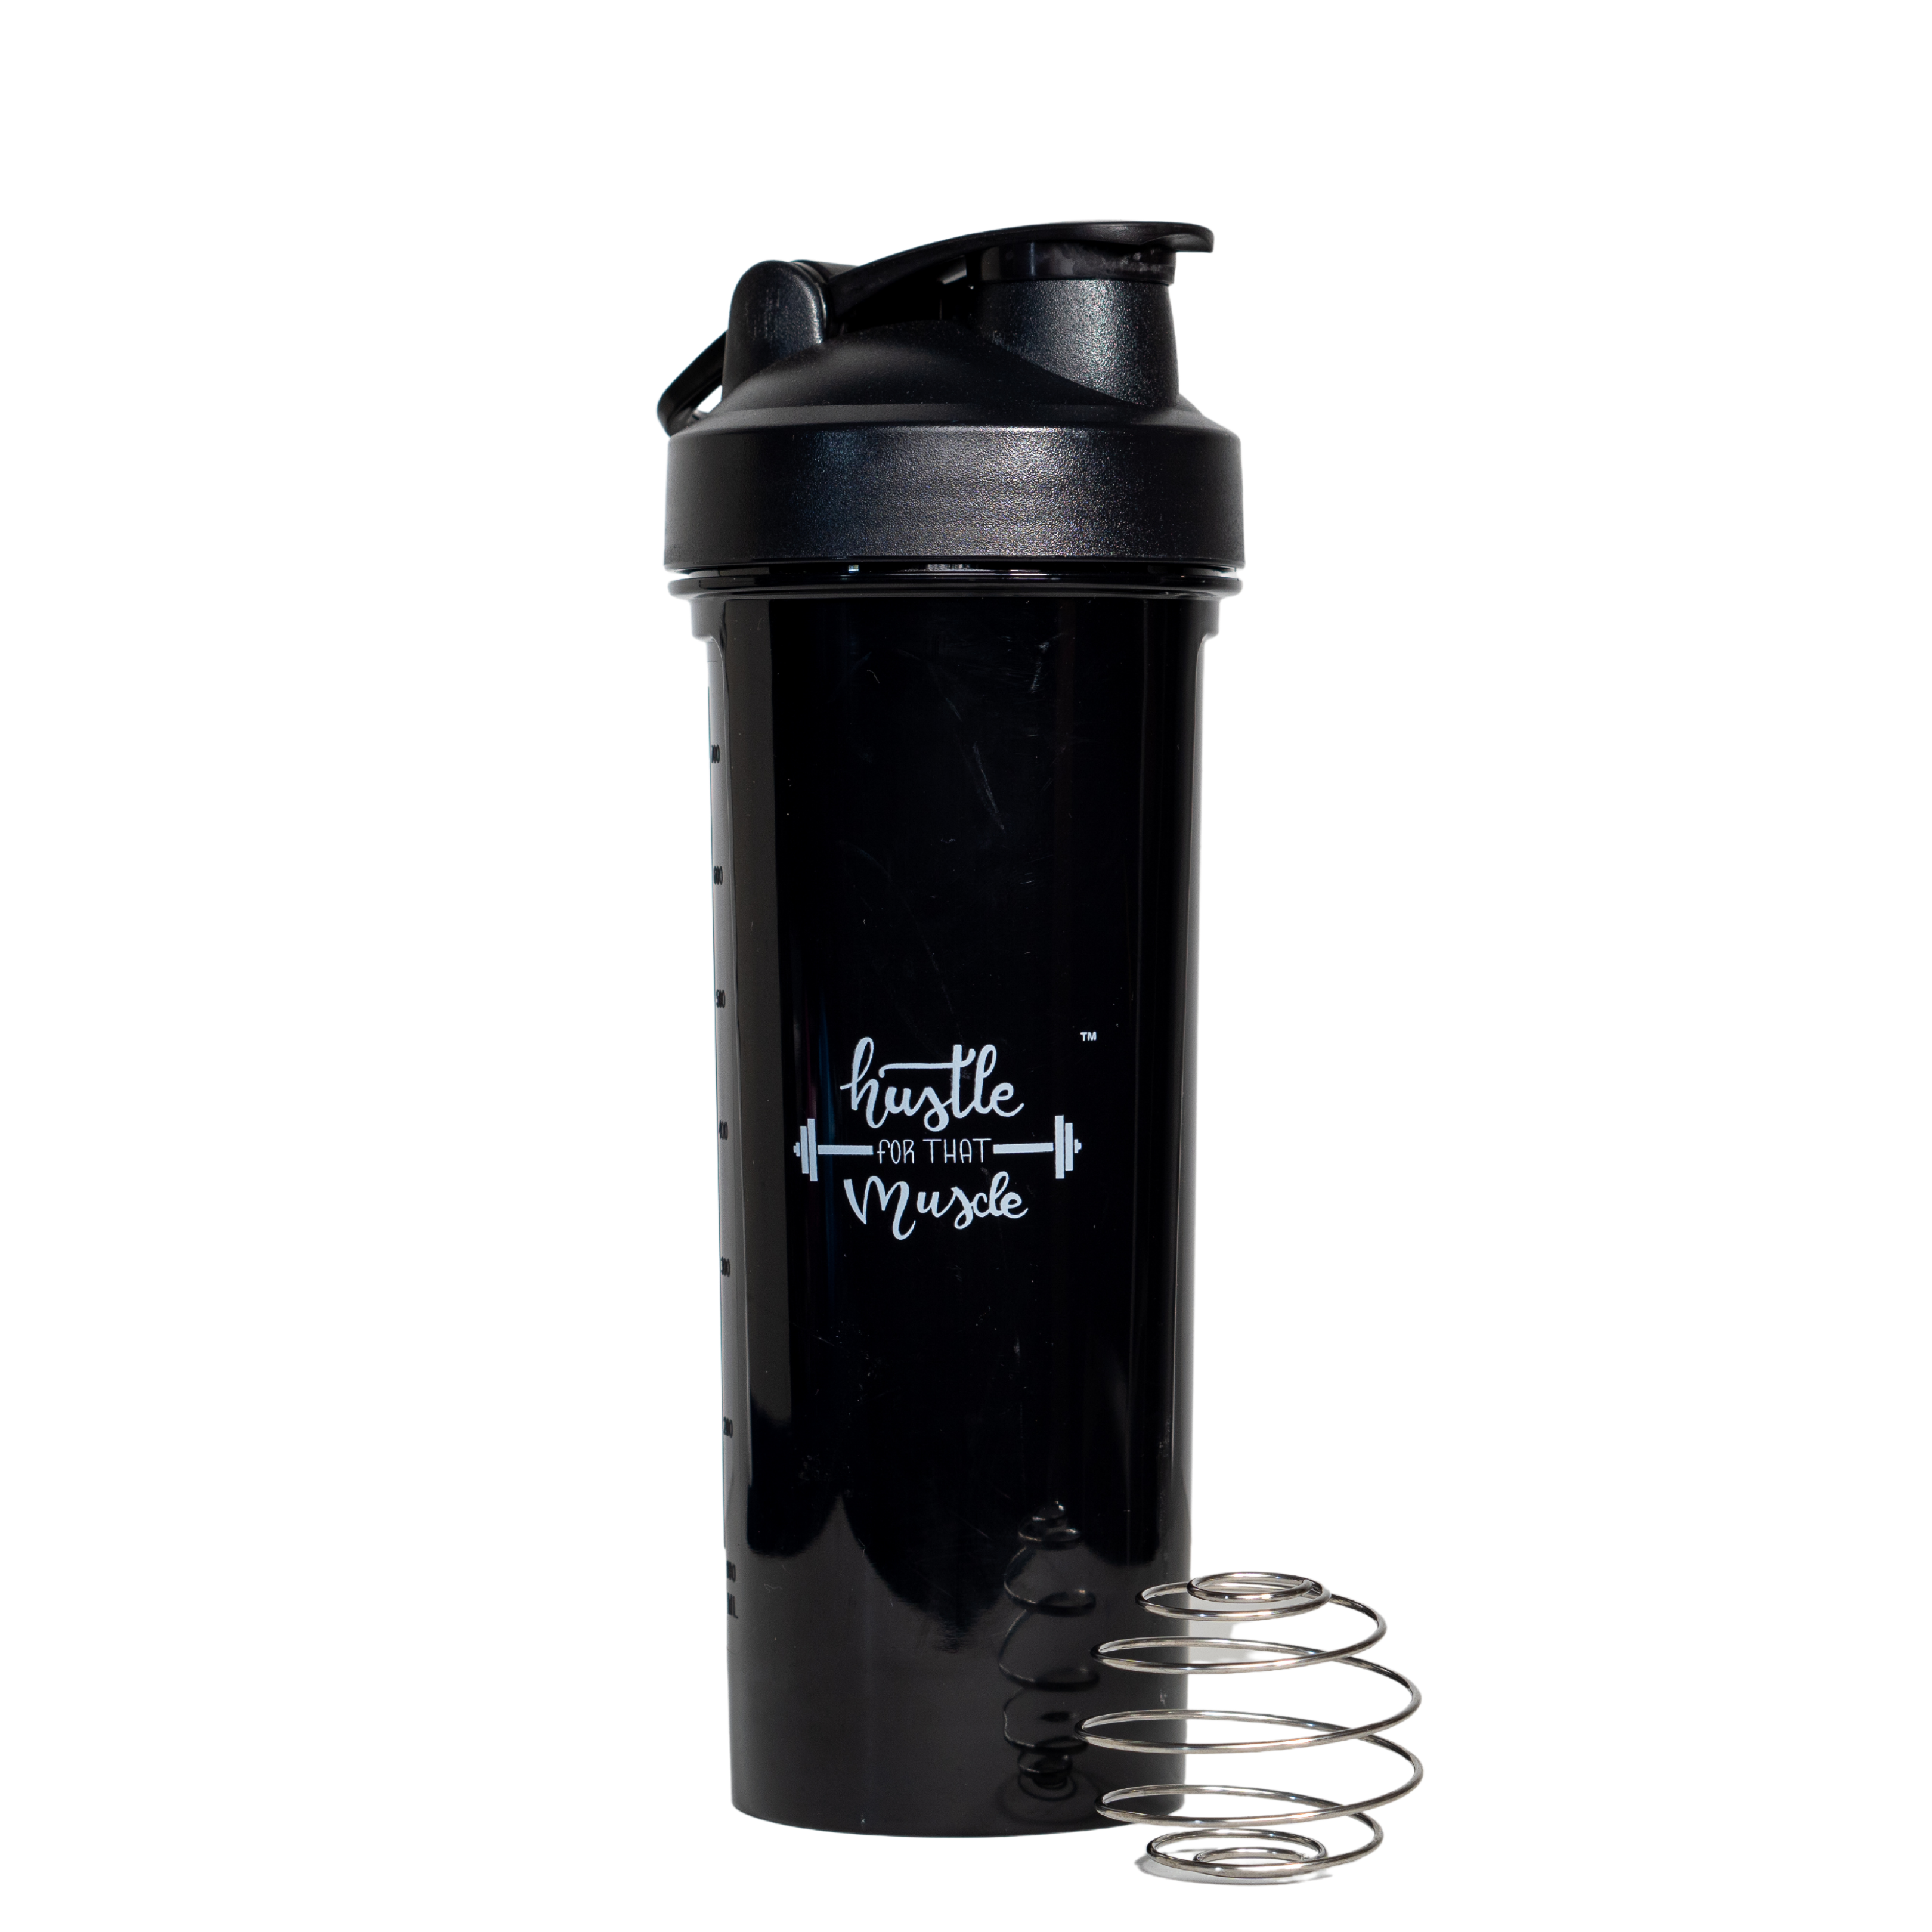 NutriFit Plus Sport Master Protein Shaker 26oz with Stainless Steel Perfect Mixer Ball